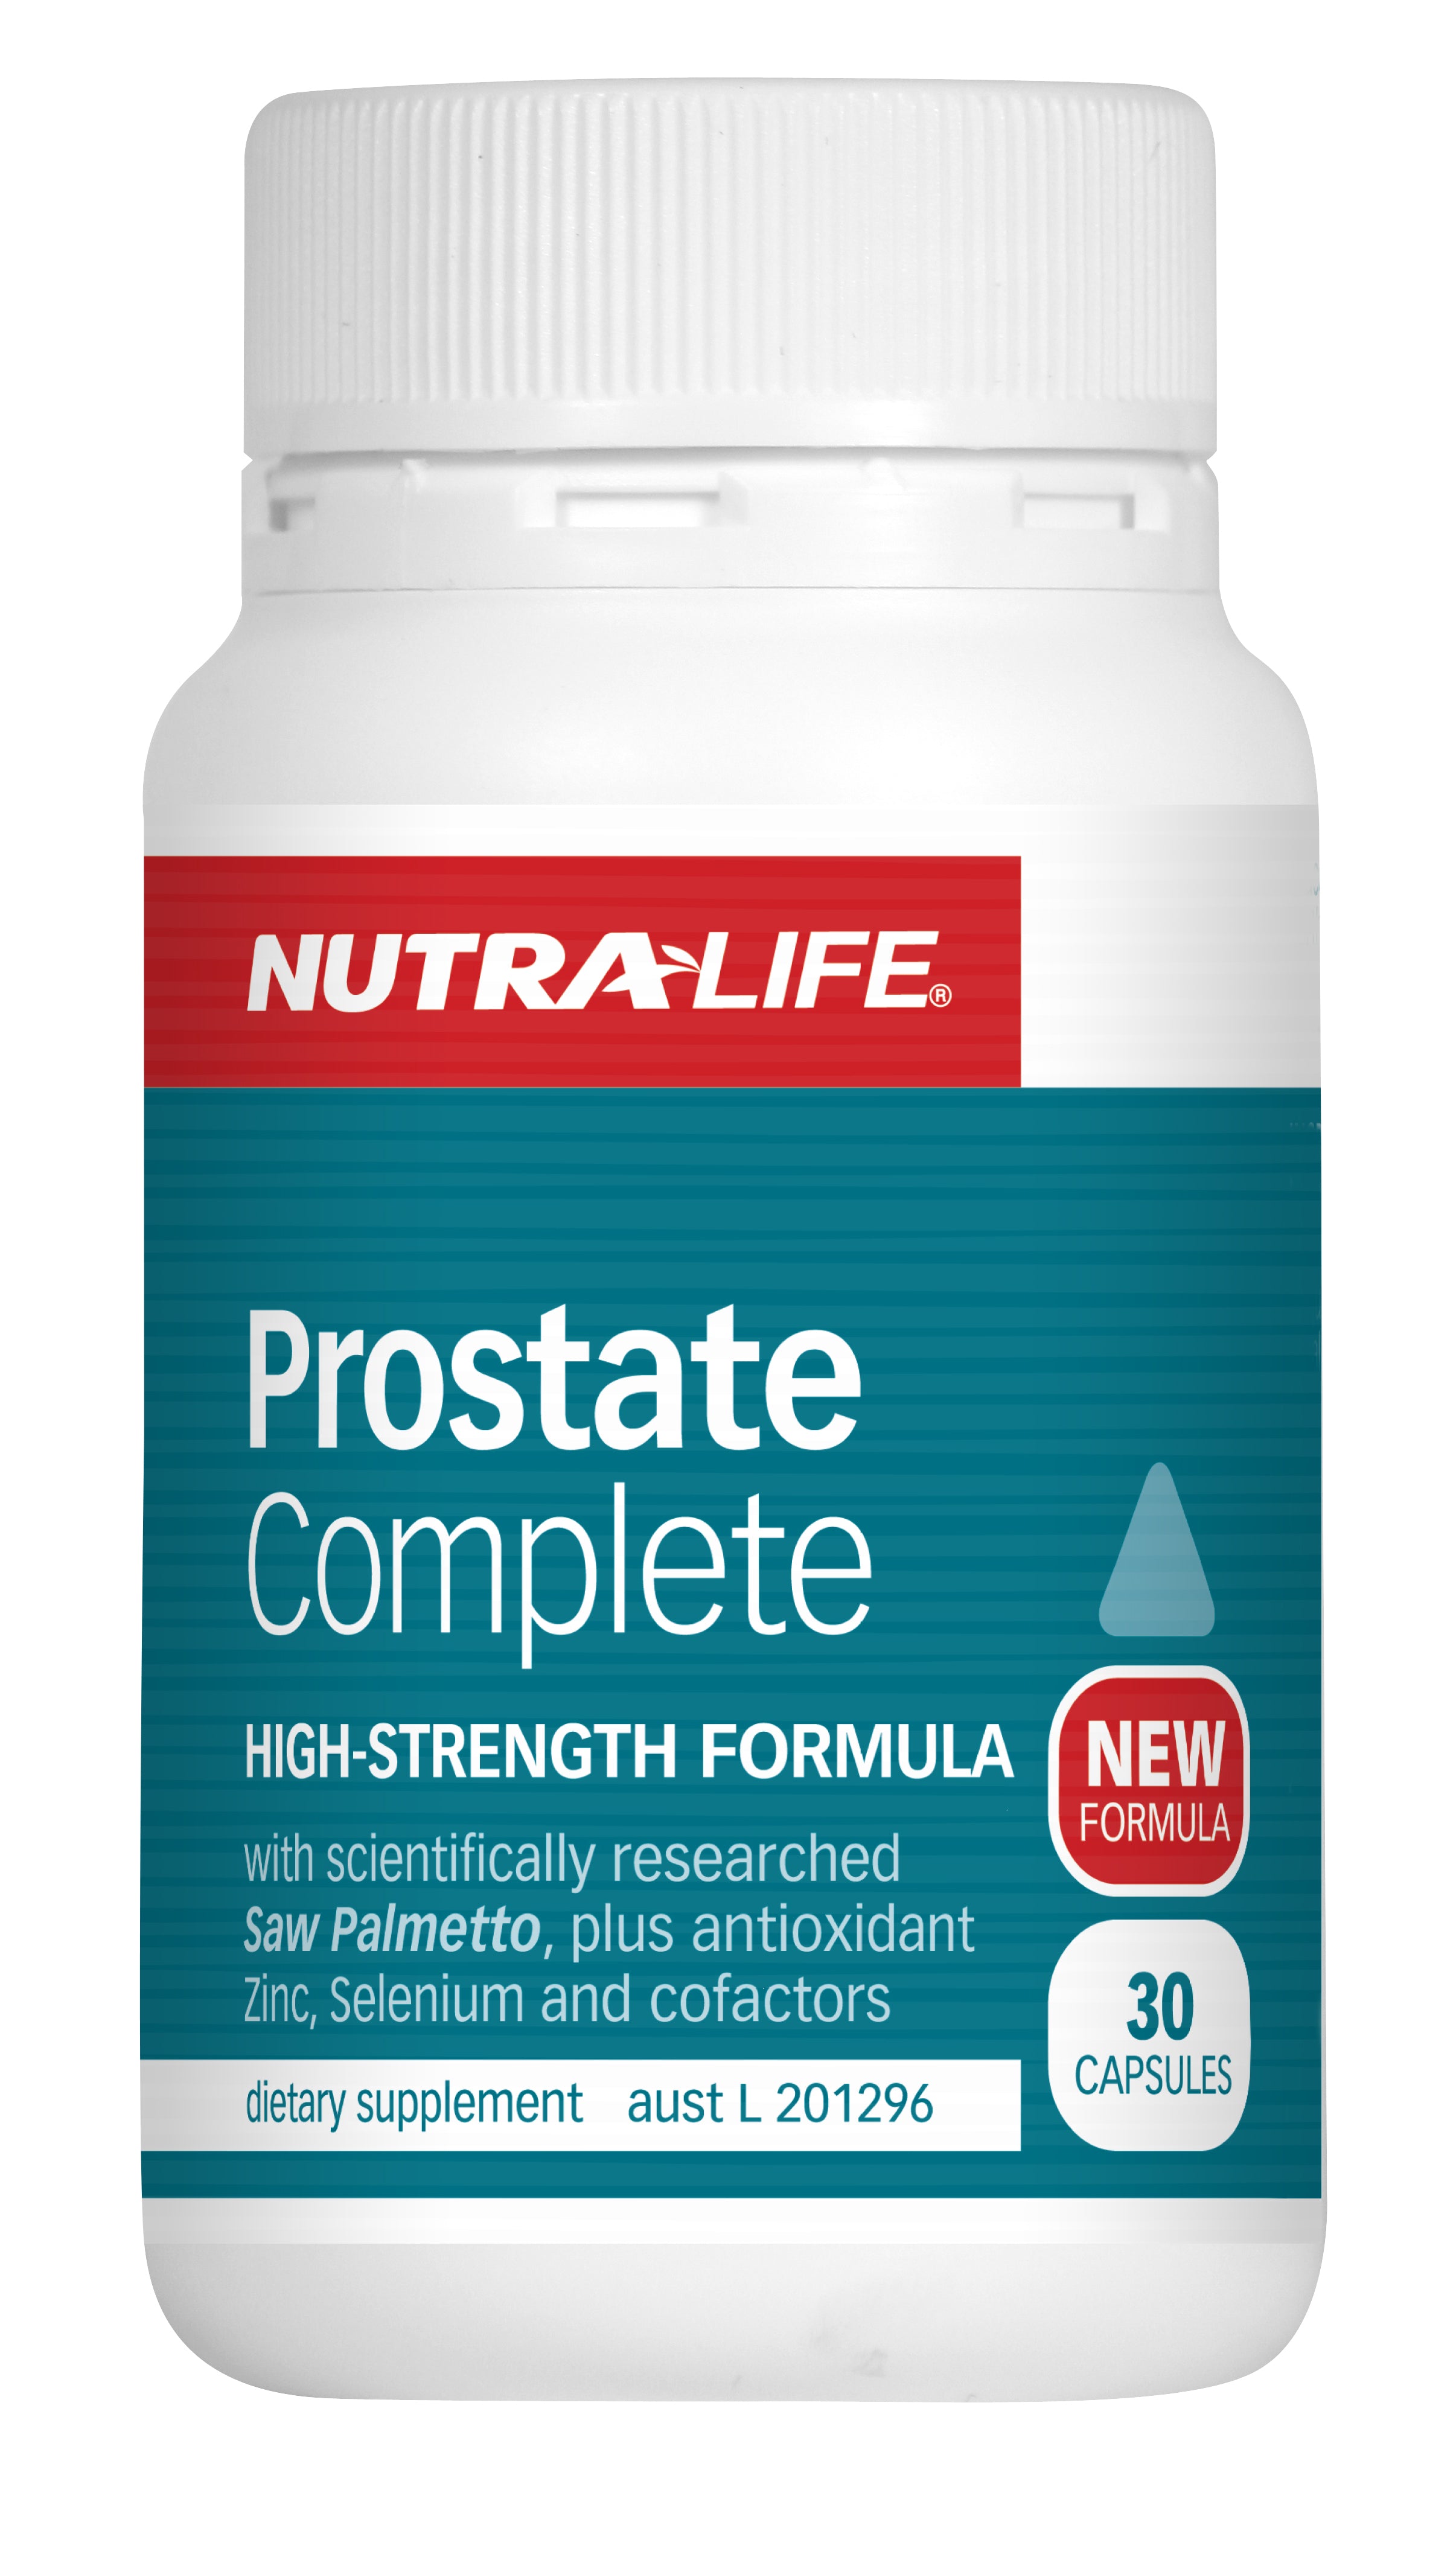 Nutralife Prostate Complete Capsules 30